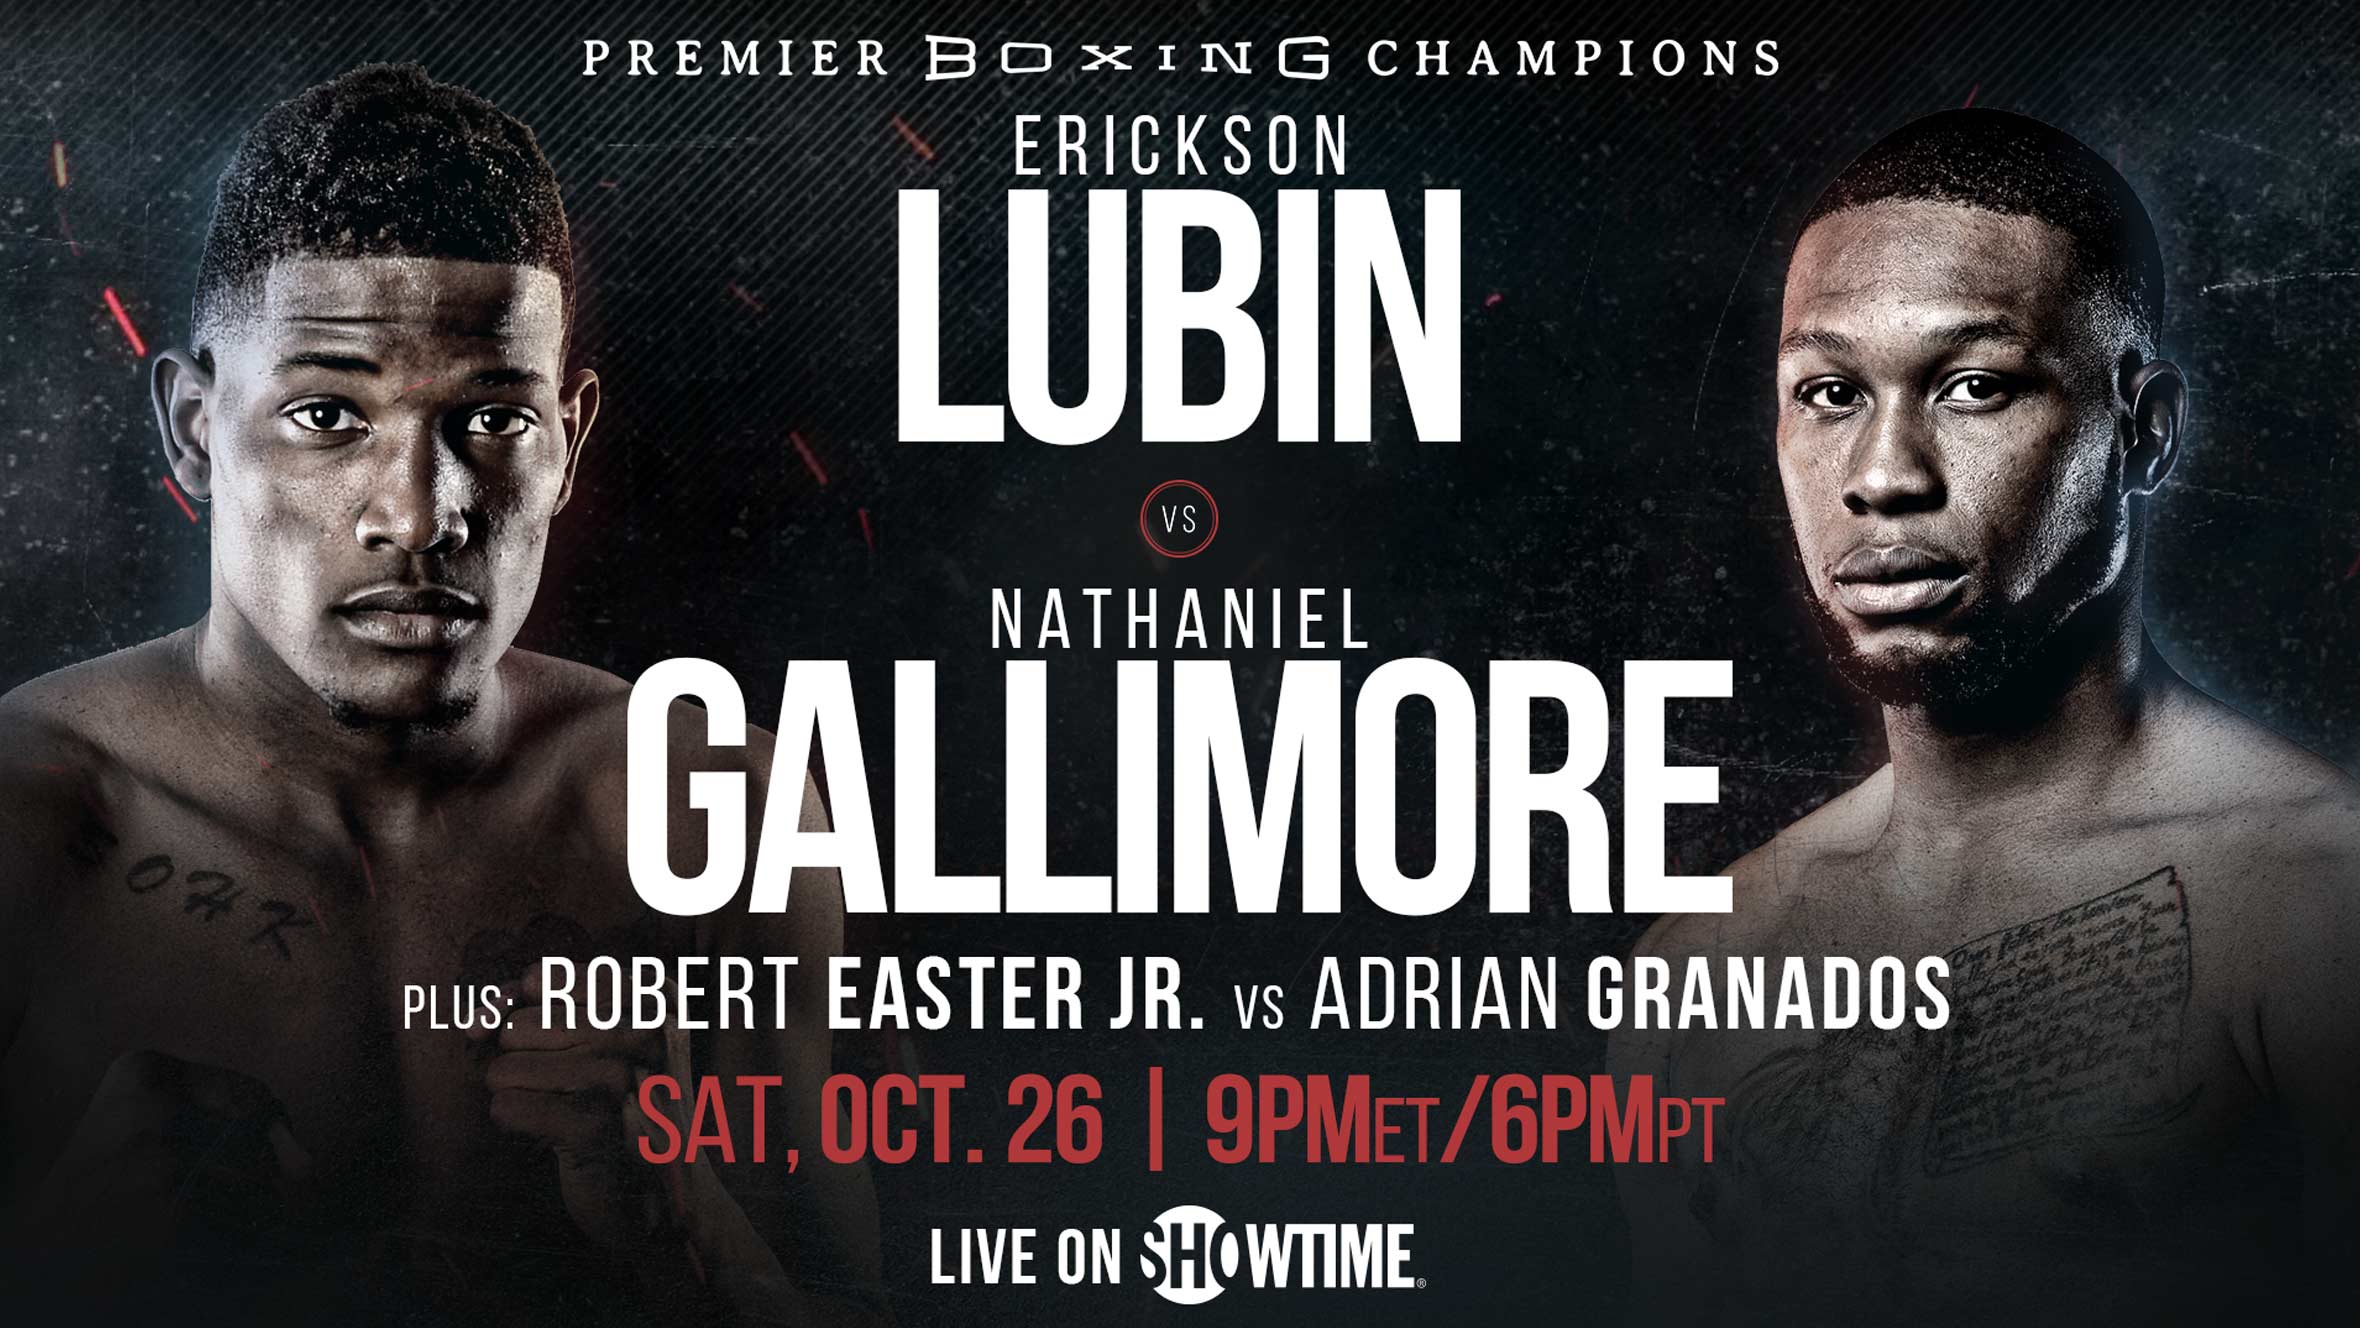 Erickson Lubin faces replacement Nathaniel Gallimore Oct